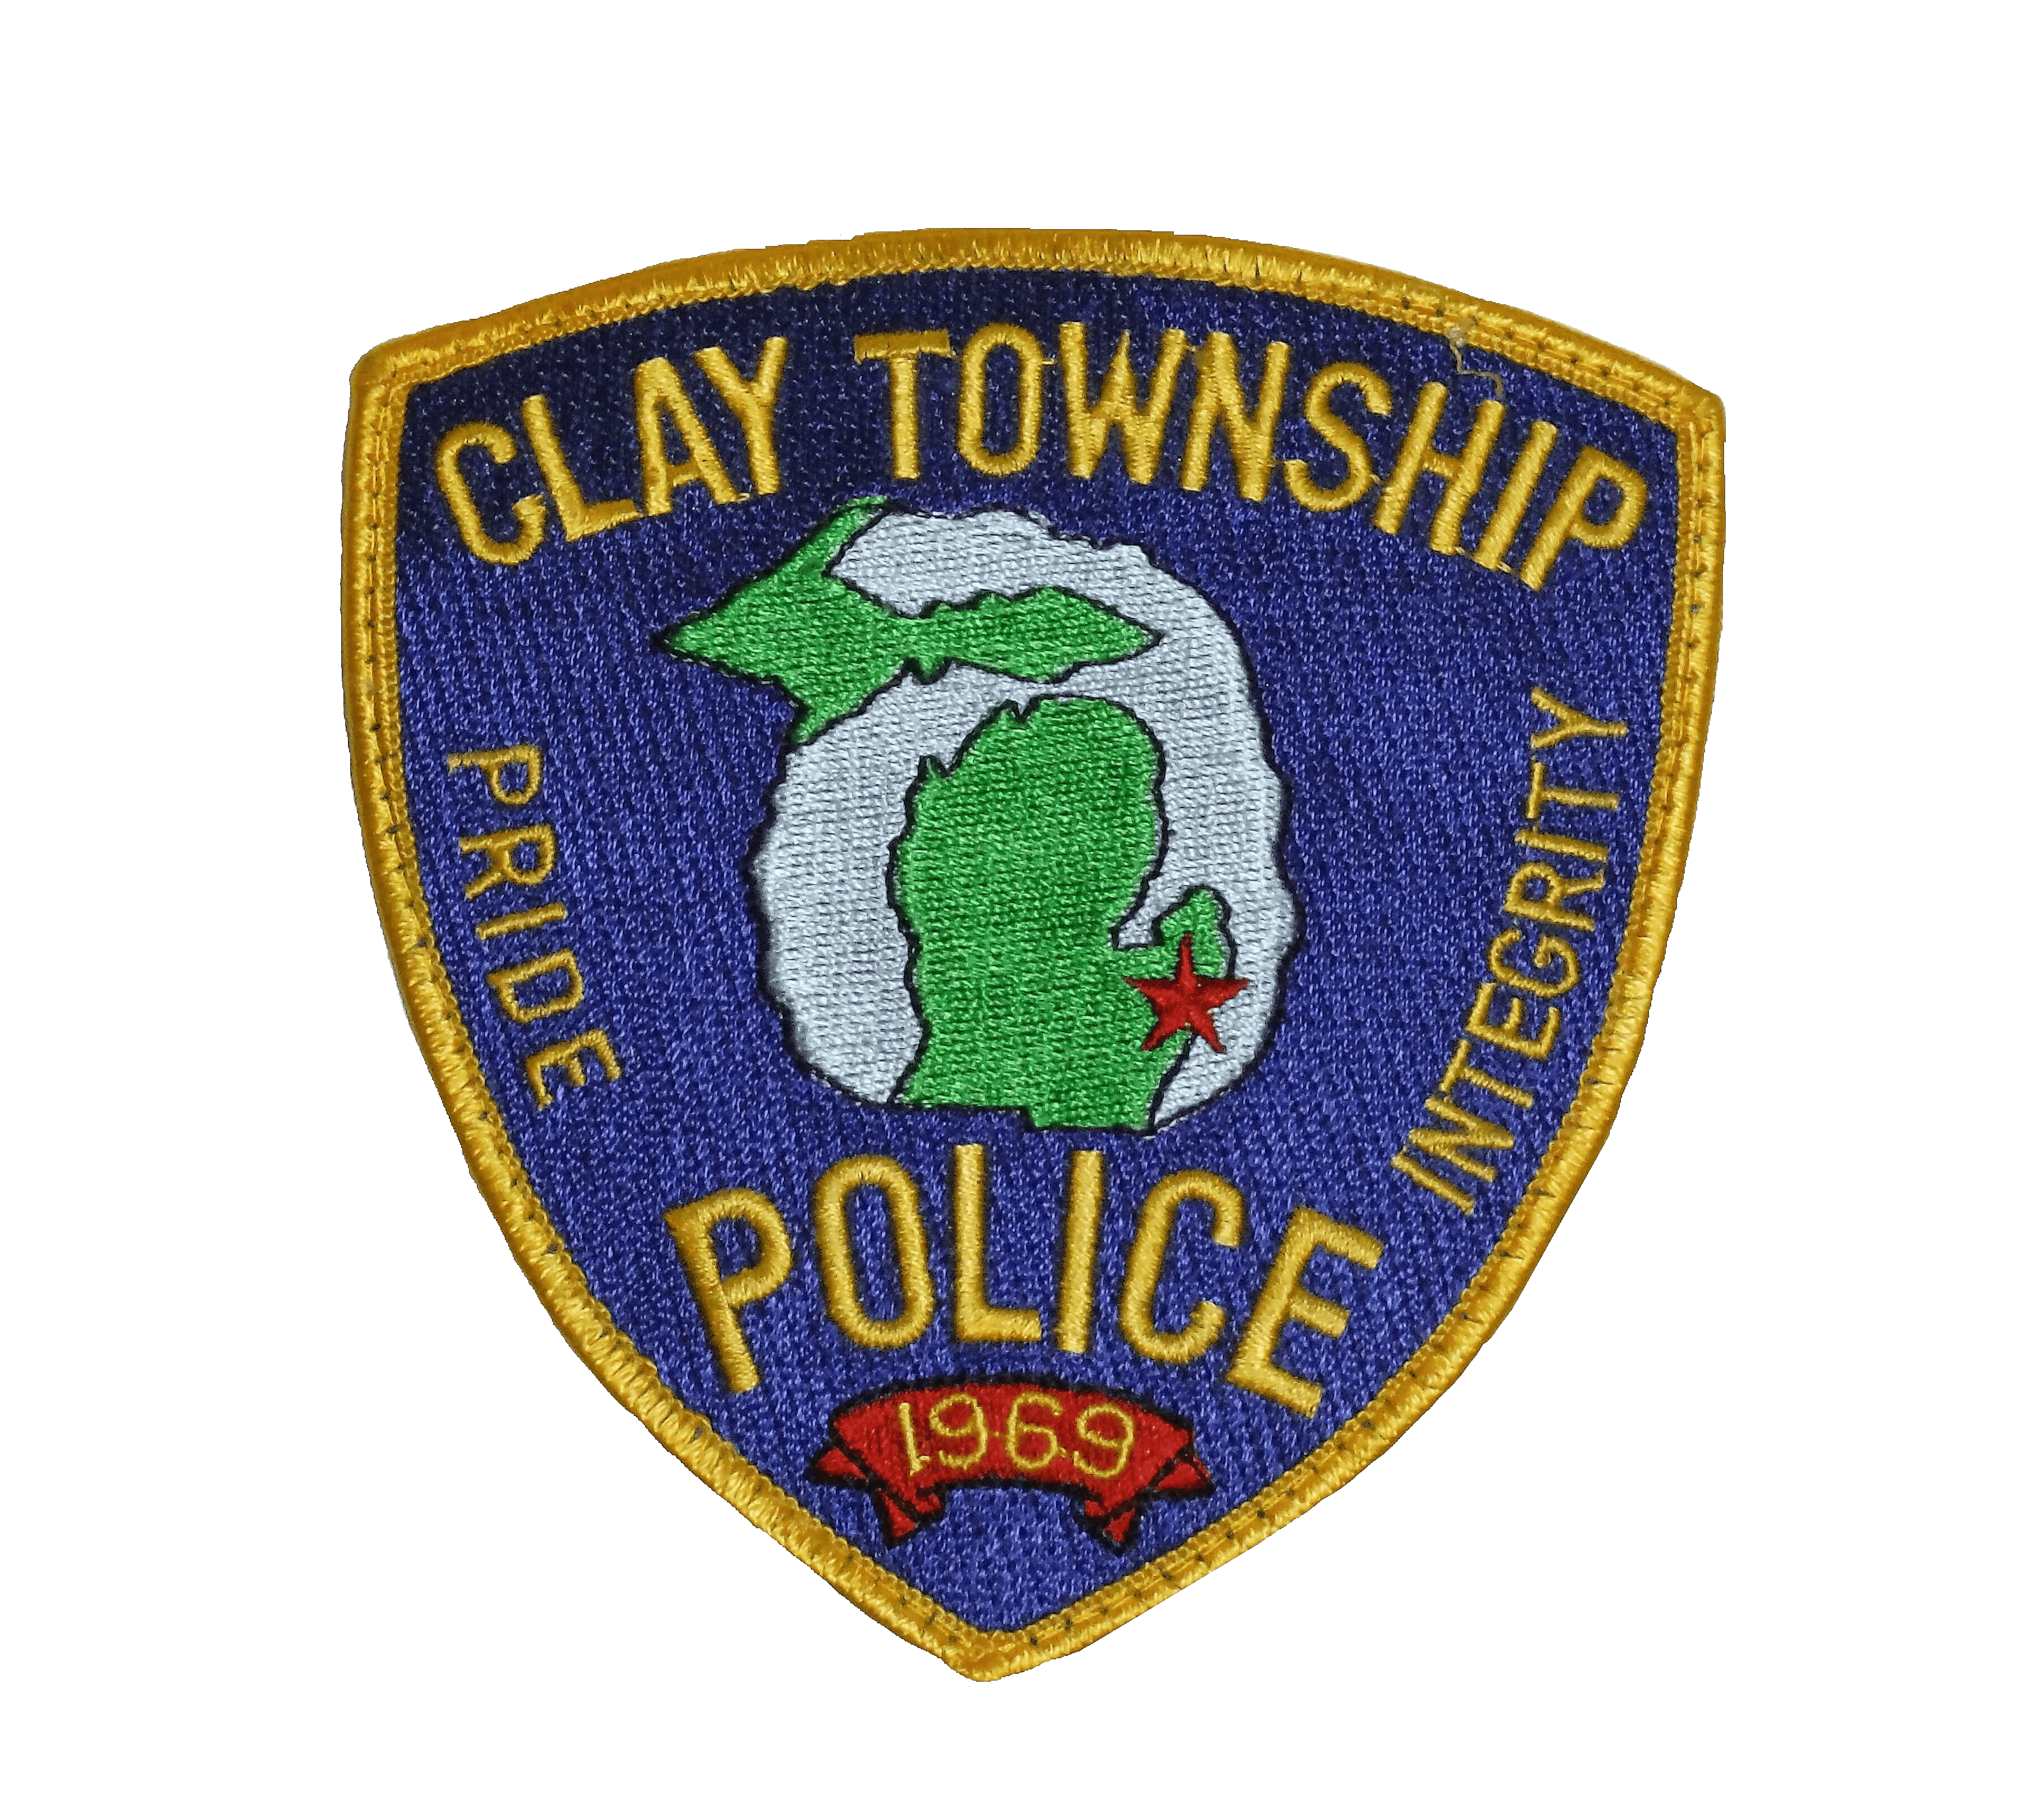 Clay Township Police